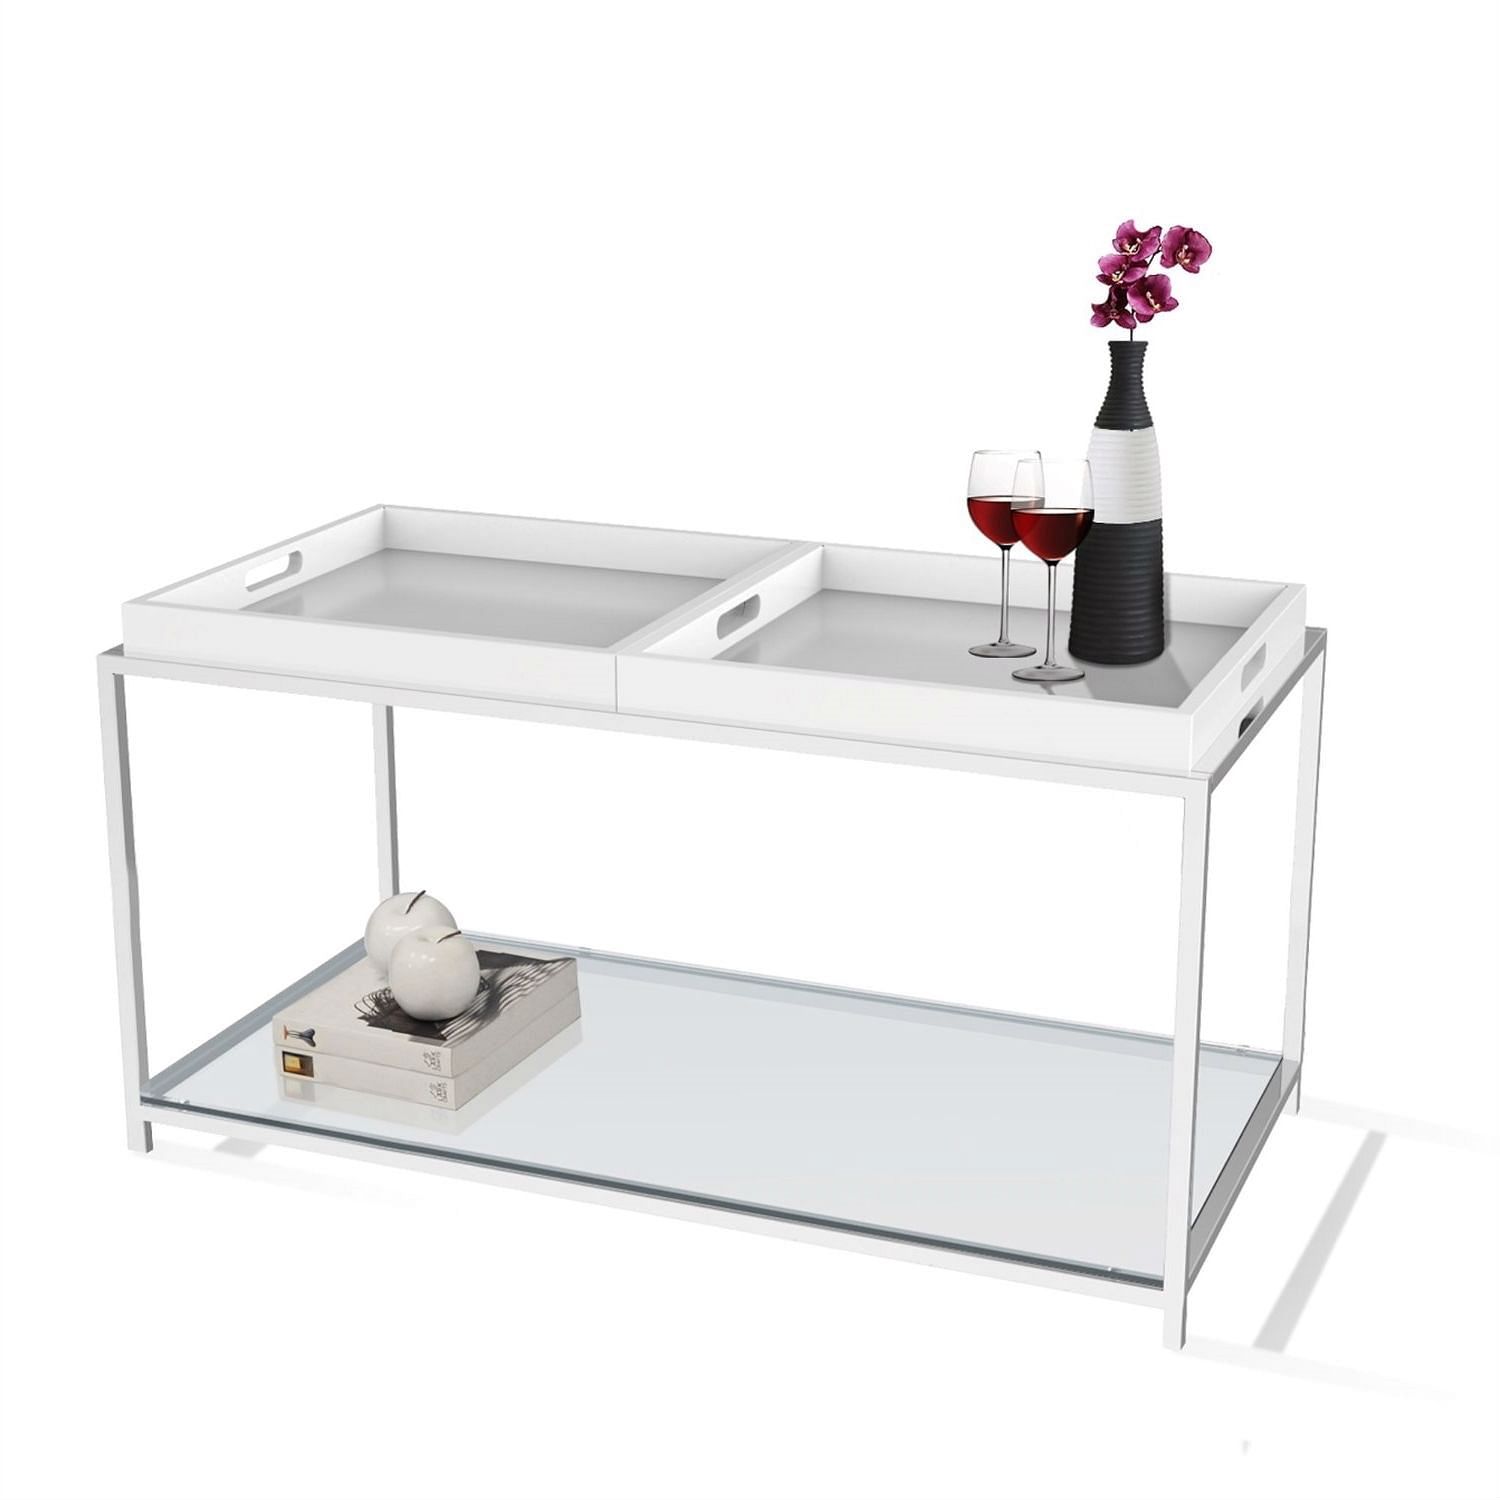 Modern Chrome Metal Coffee Table 2 White Removable Trays With Regard To Detachable Tray Coffee Tables (View 20 of 20)